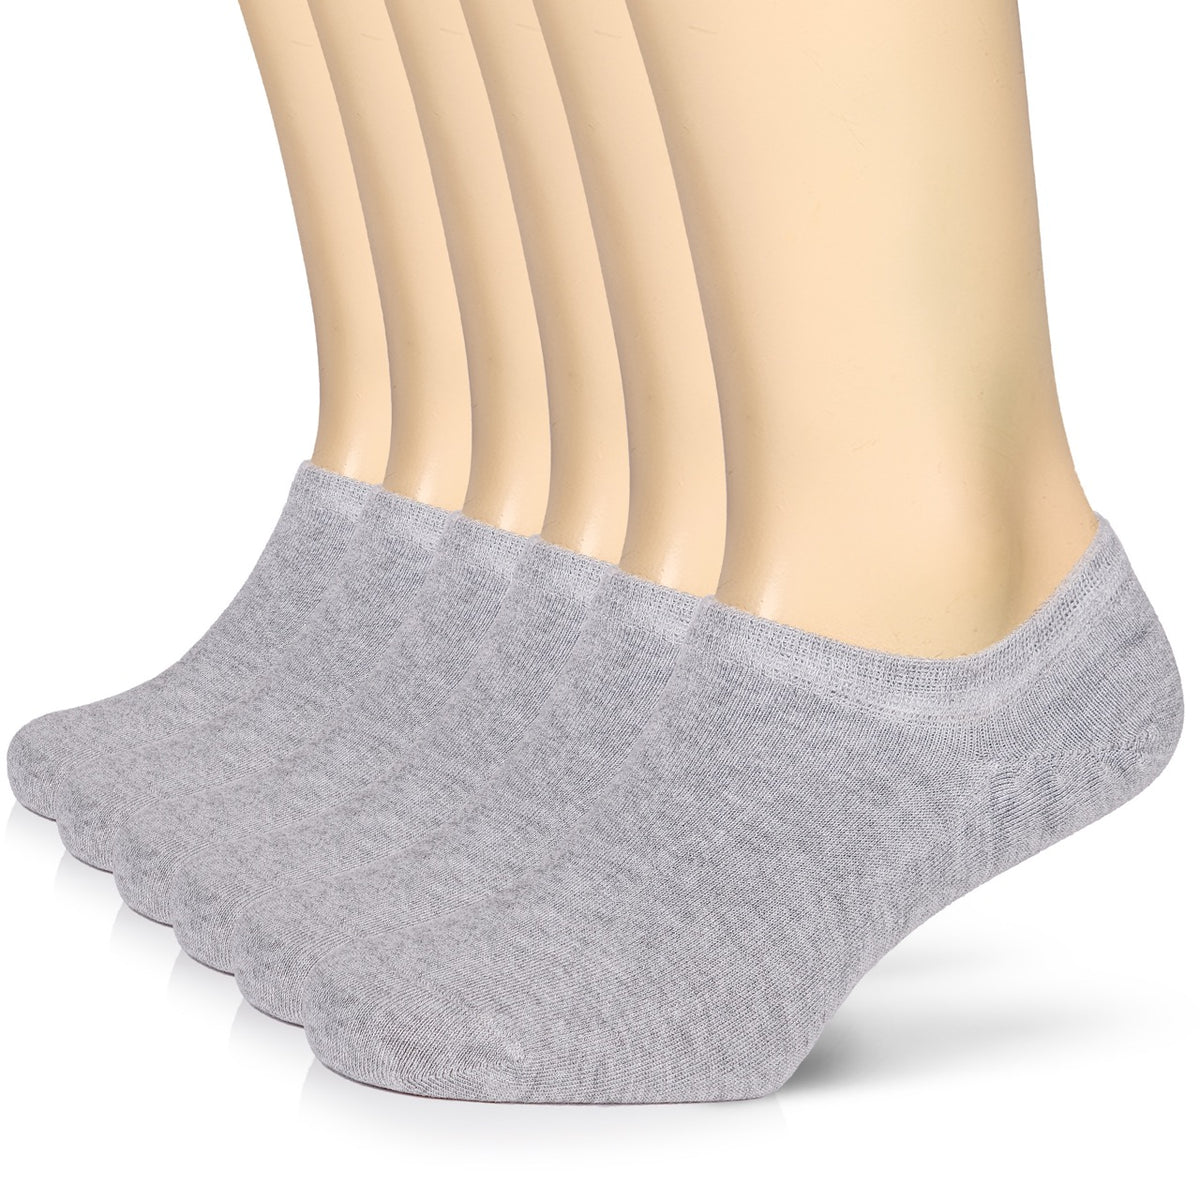 A set of three pairs of men's bamboo no-show socks in gray, perfect for any occasion.